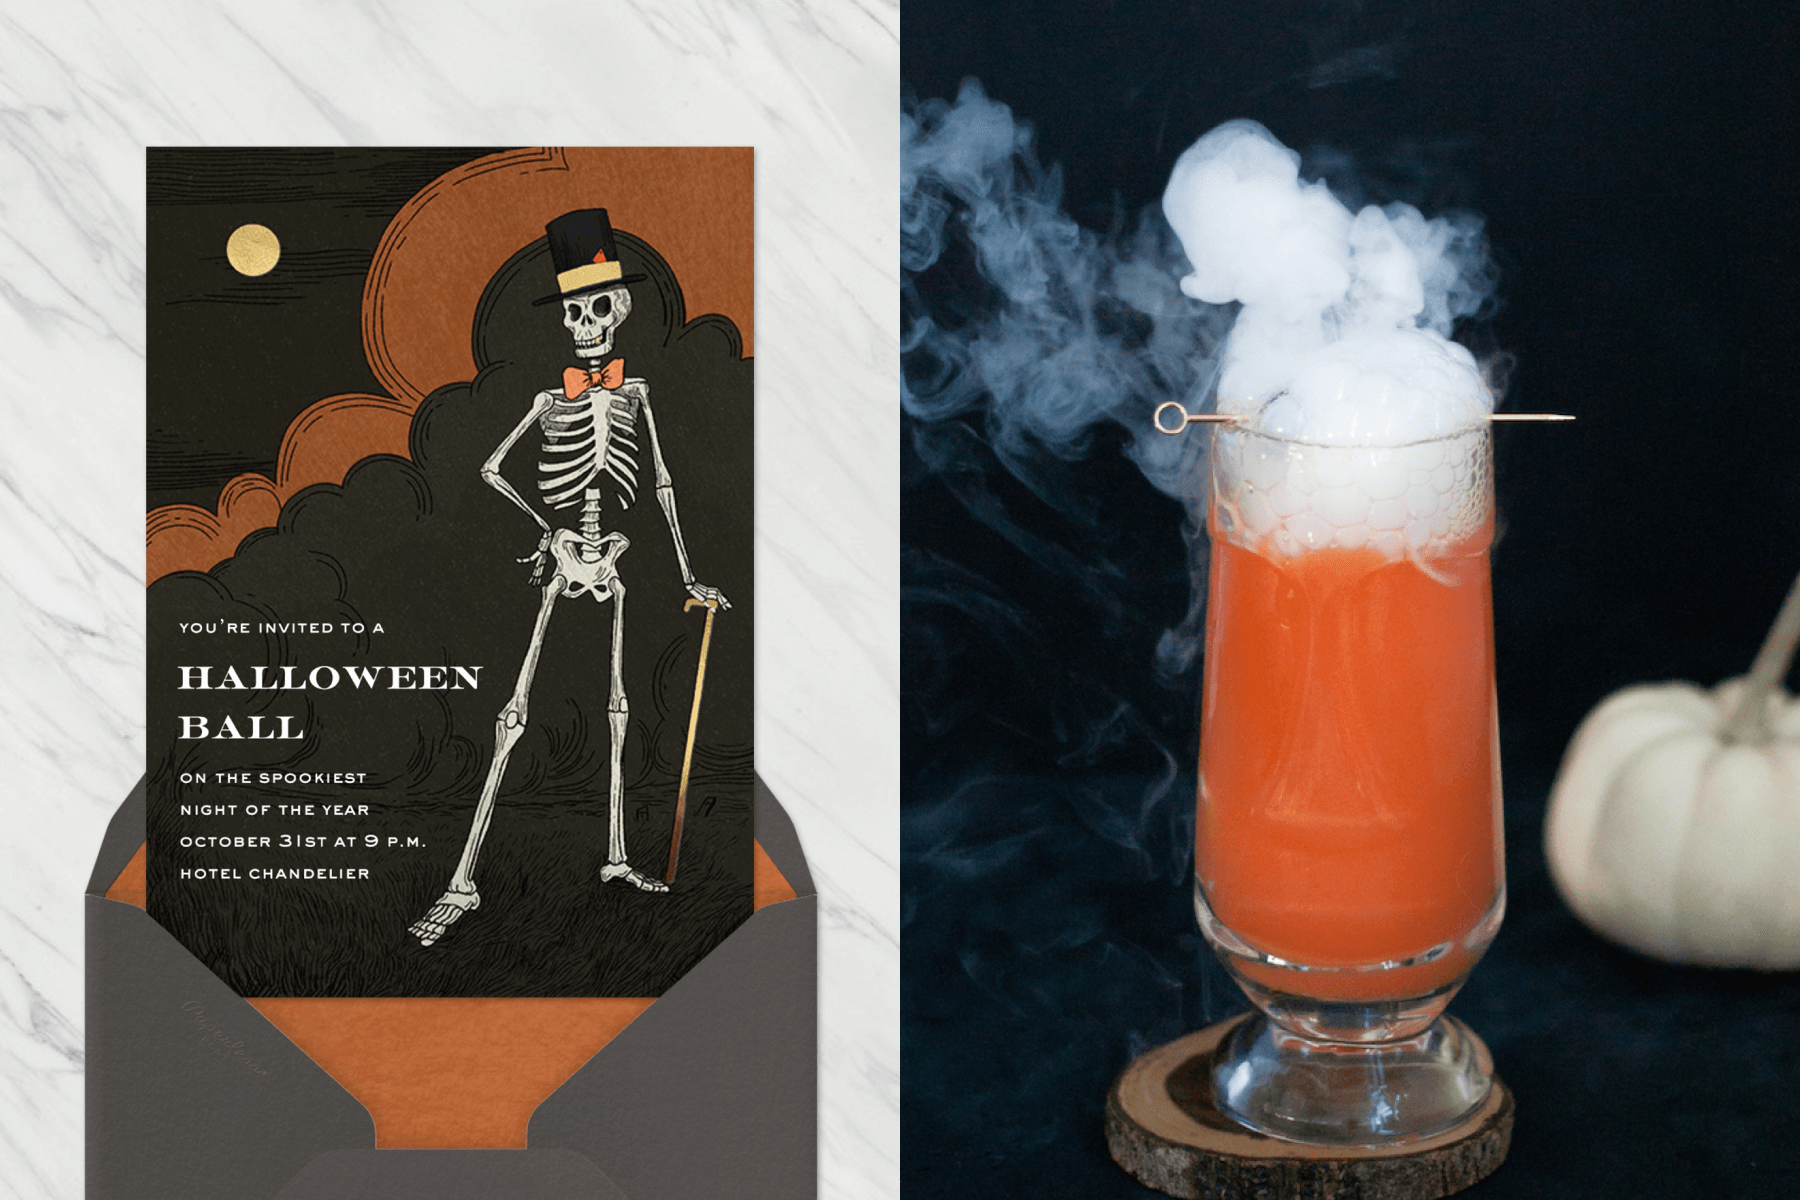 Left: A black Halloween invitation with an illustration of a dapper skeleton wearing a top hat, a bowtie, and a cane; Right: A walking dead cocktail with dry ice billowing out the top.